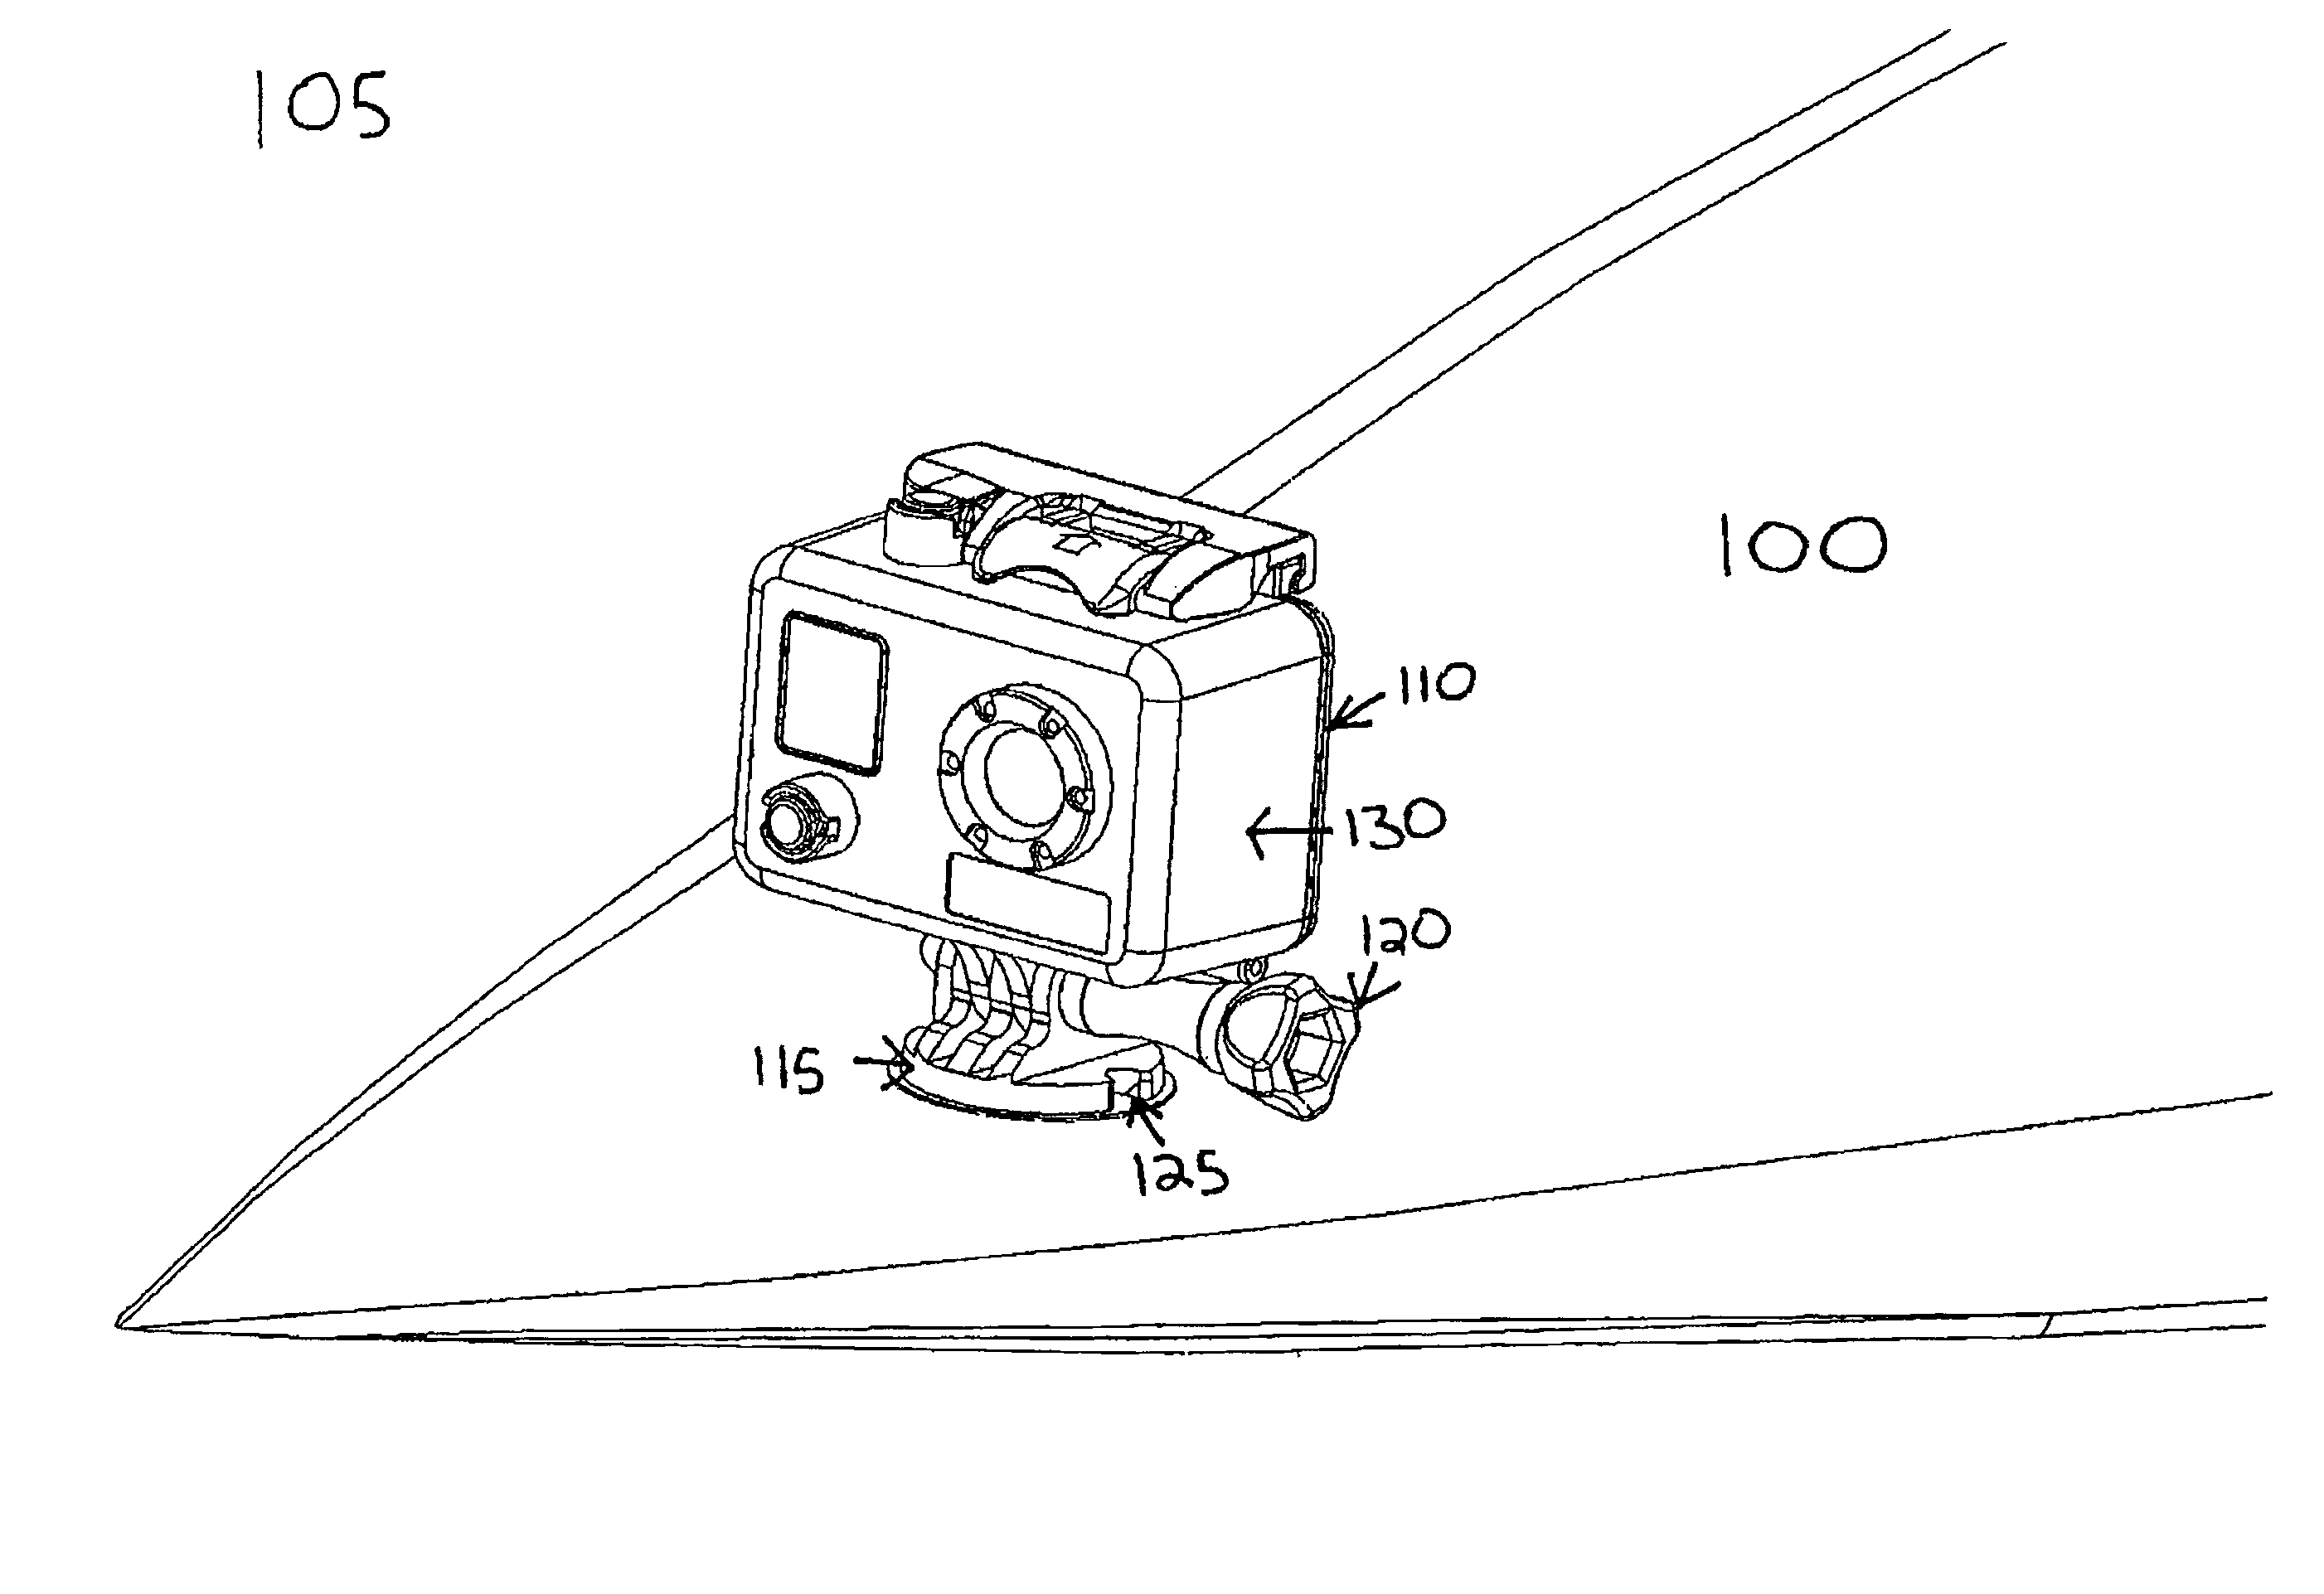 Mount system for attaching camera to a sport board